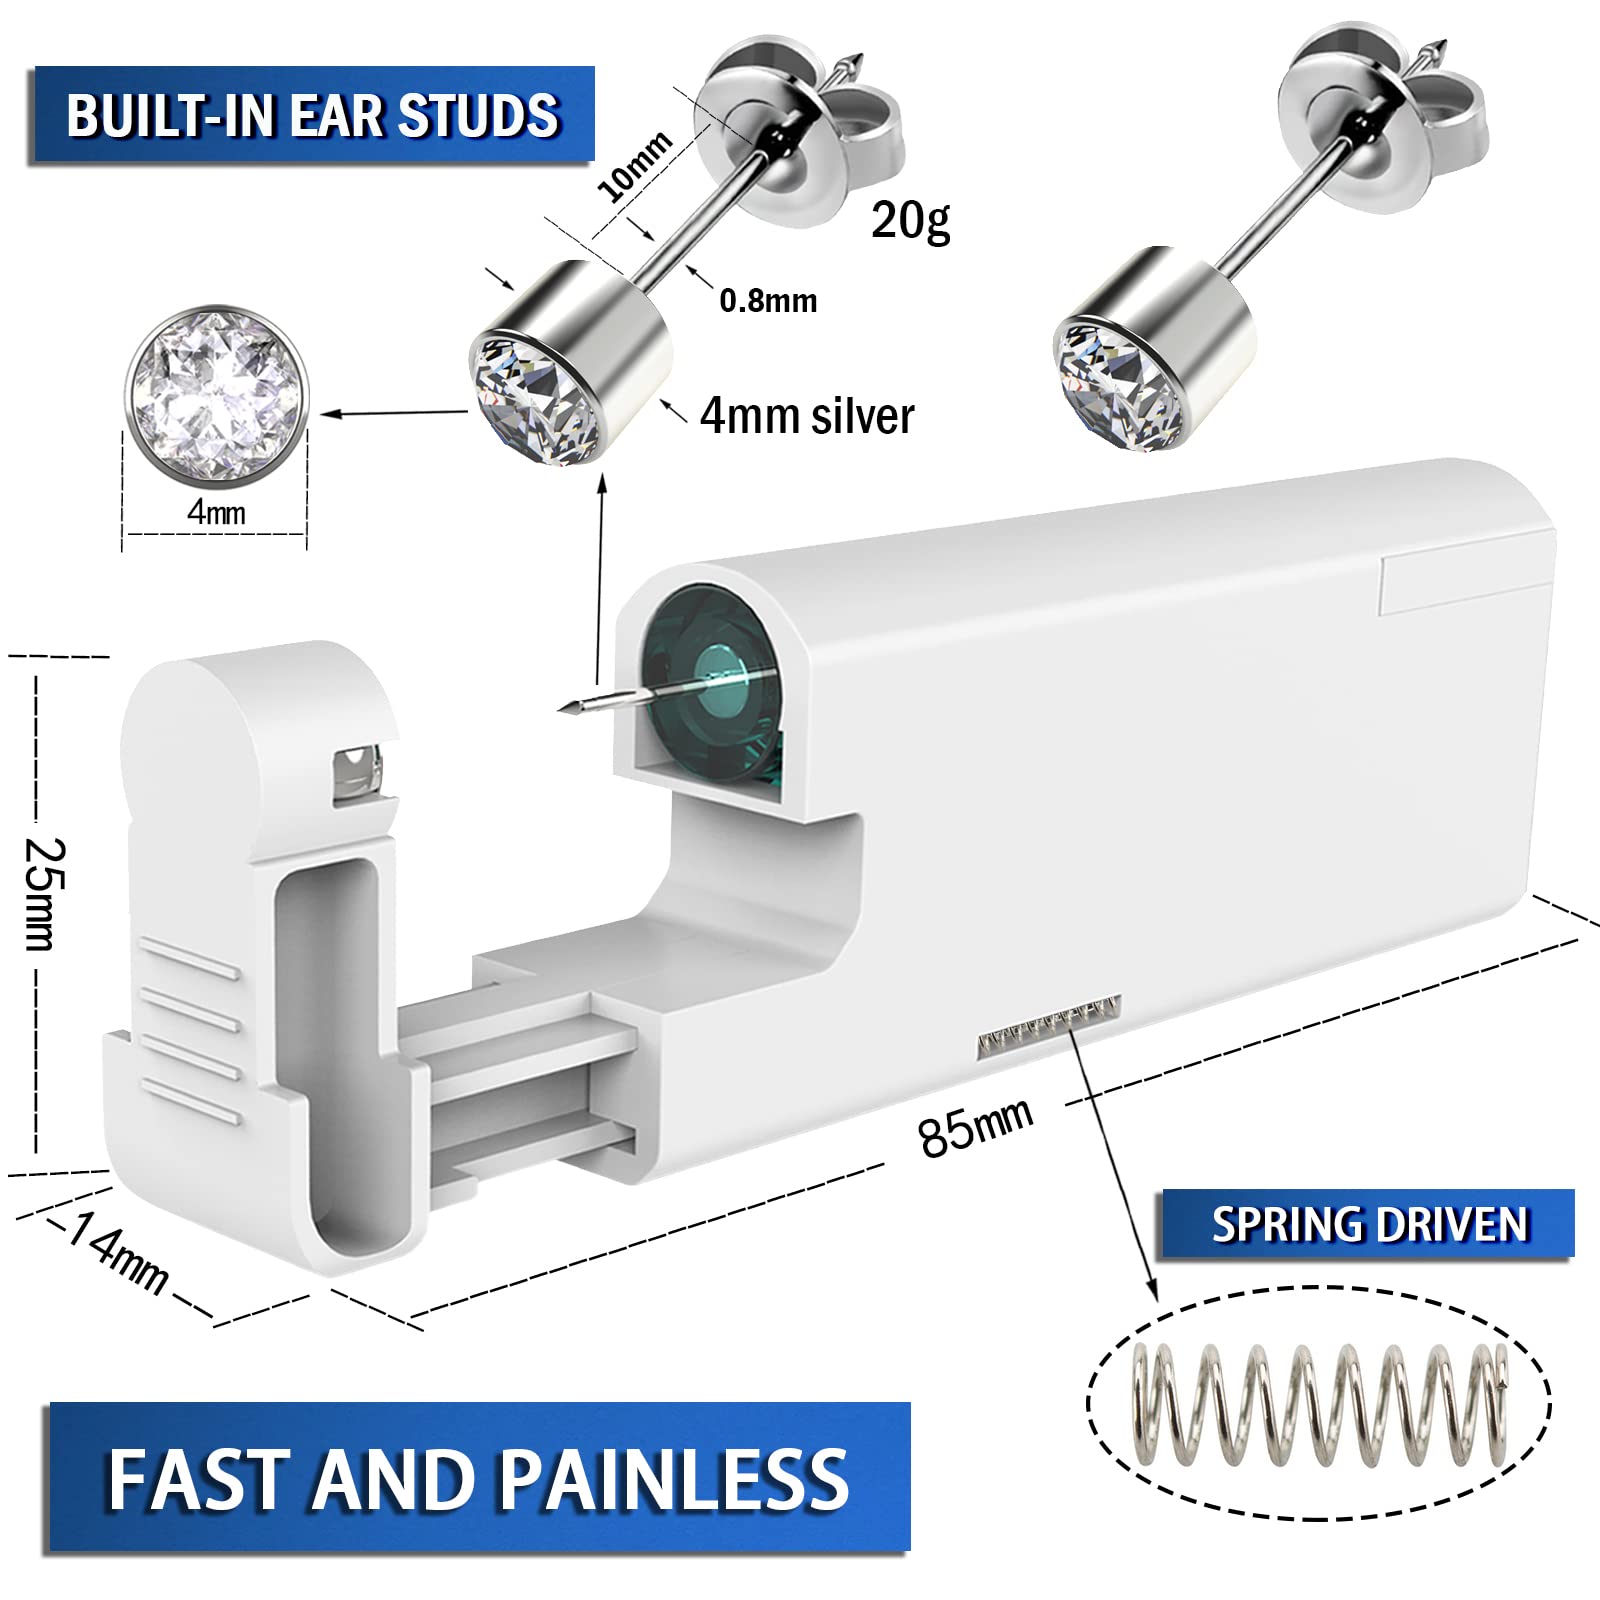 2Pcs Ear Piercing Kit Automatic and Painless Ear Nail Gun Disposable Aseptic Household Ear Piercing Gun Portable Ear Piercing Gun Group Ear Piercing Tools With Built-in 4mm Hypoallergenic Ear Studs